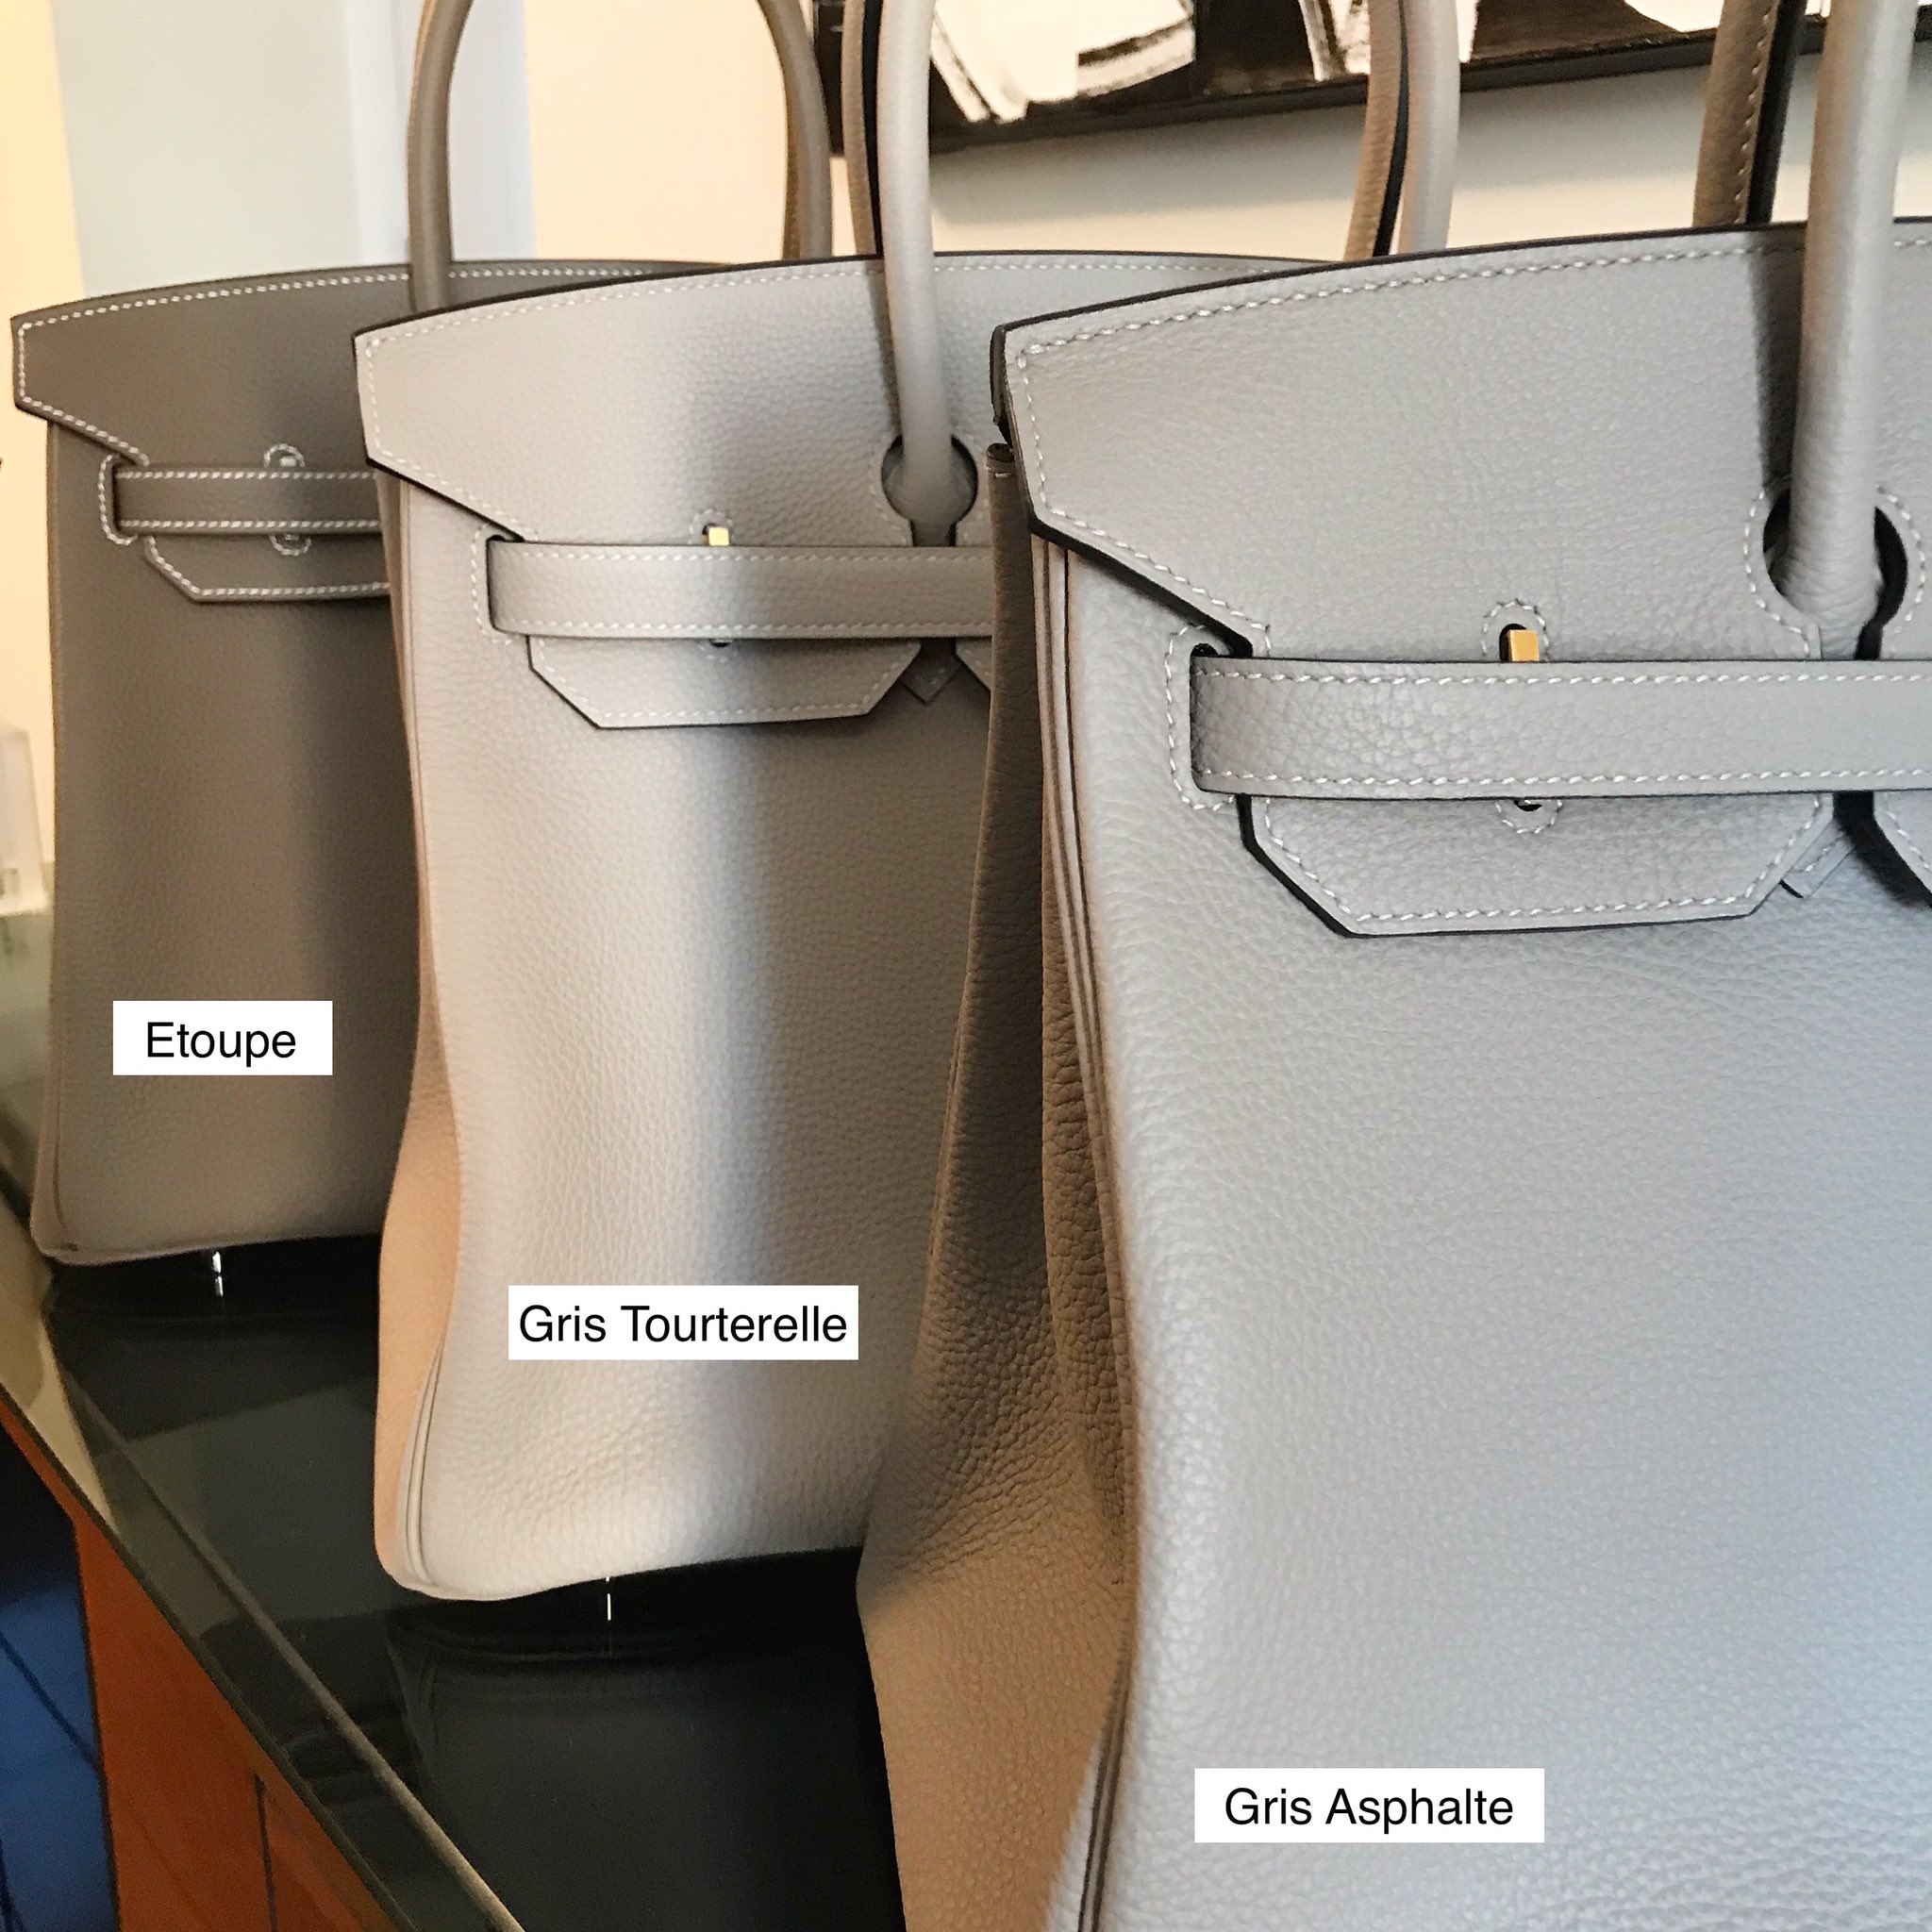 MadisonAvenueCouture on X: The neutral #Hermès lineup! #Etoupe,  #GrisTourterelle and #GrisAsphalte (L-R)! Which is your favorite?   / X